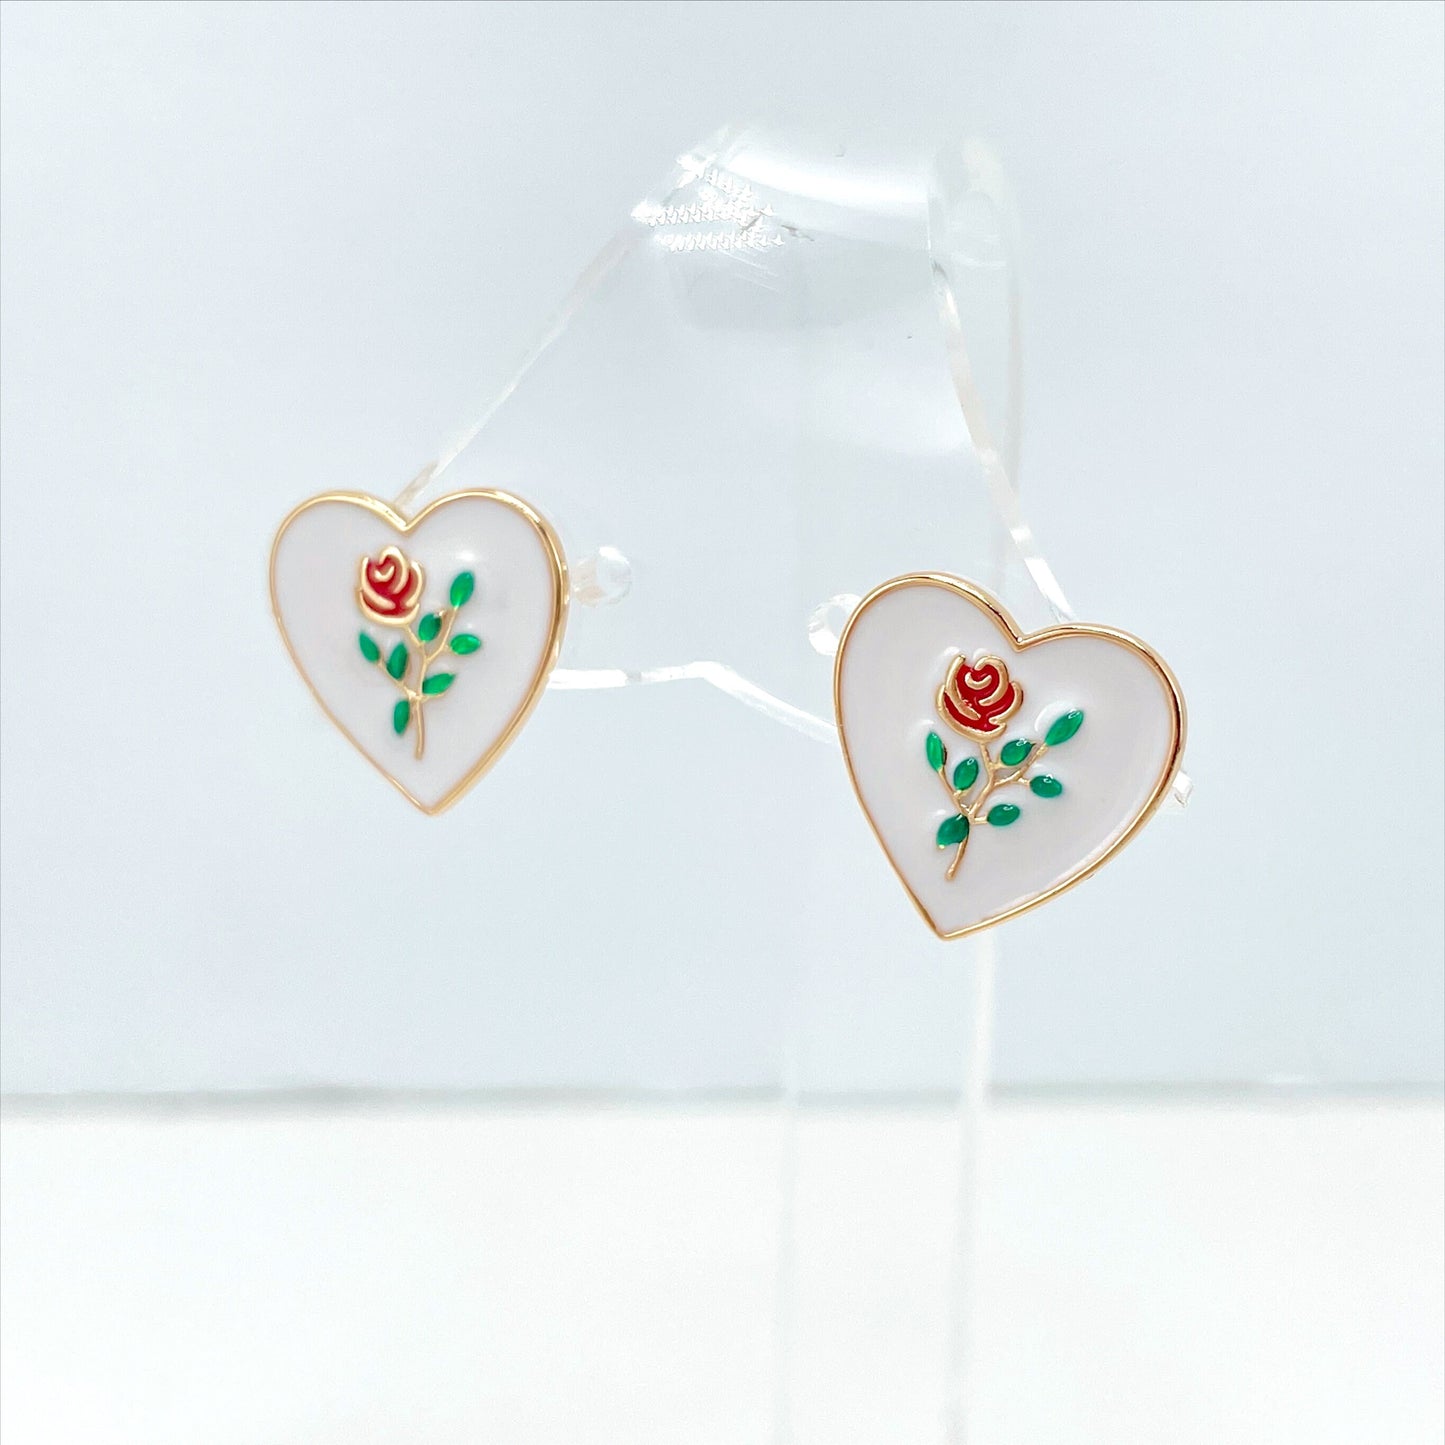 18k Gold Filled Colored Enamel with Rose Inside in Heart Shape Earrings, White, Blue, Green, Red or Black Option, Wholesale Jewelry Supplies